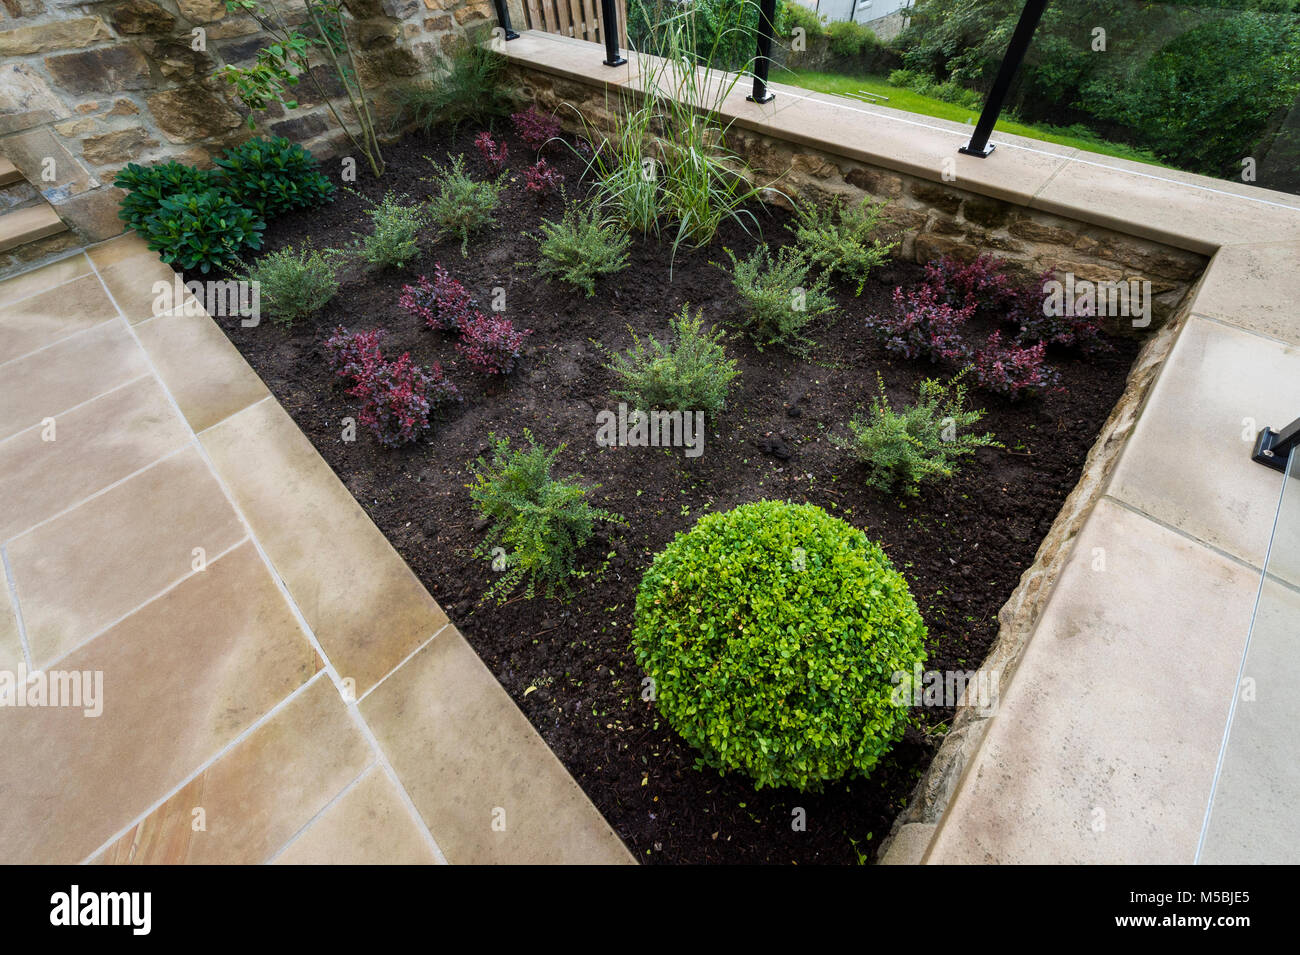 Small corner of beautiful, landscaped, private garden with contemporary design, paved patio & fresh border shrubs & plants  - Yorkshire, England, UK. Stock Photo